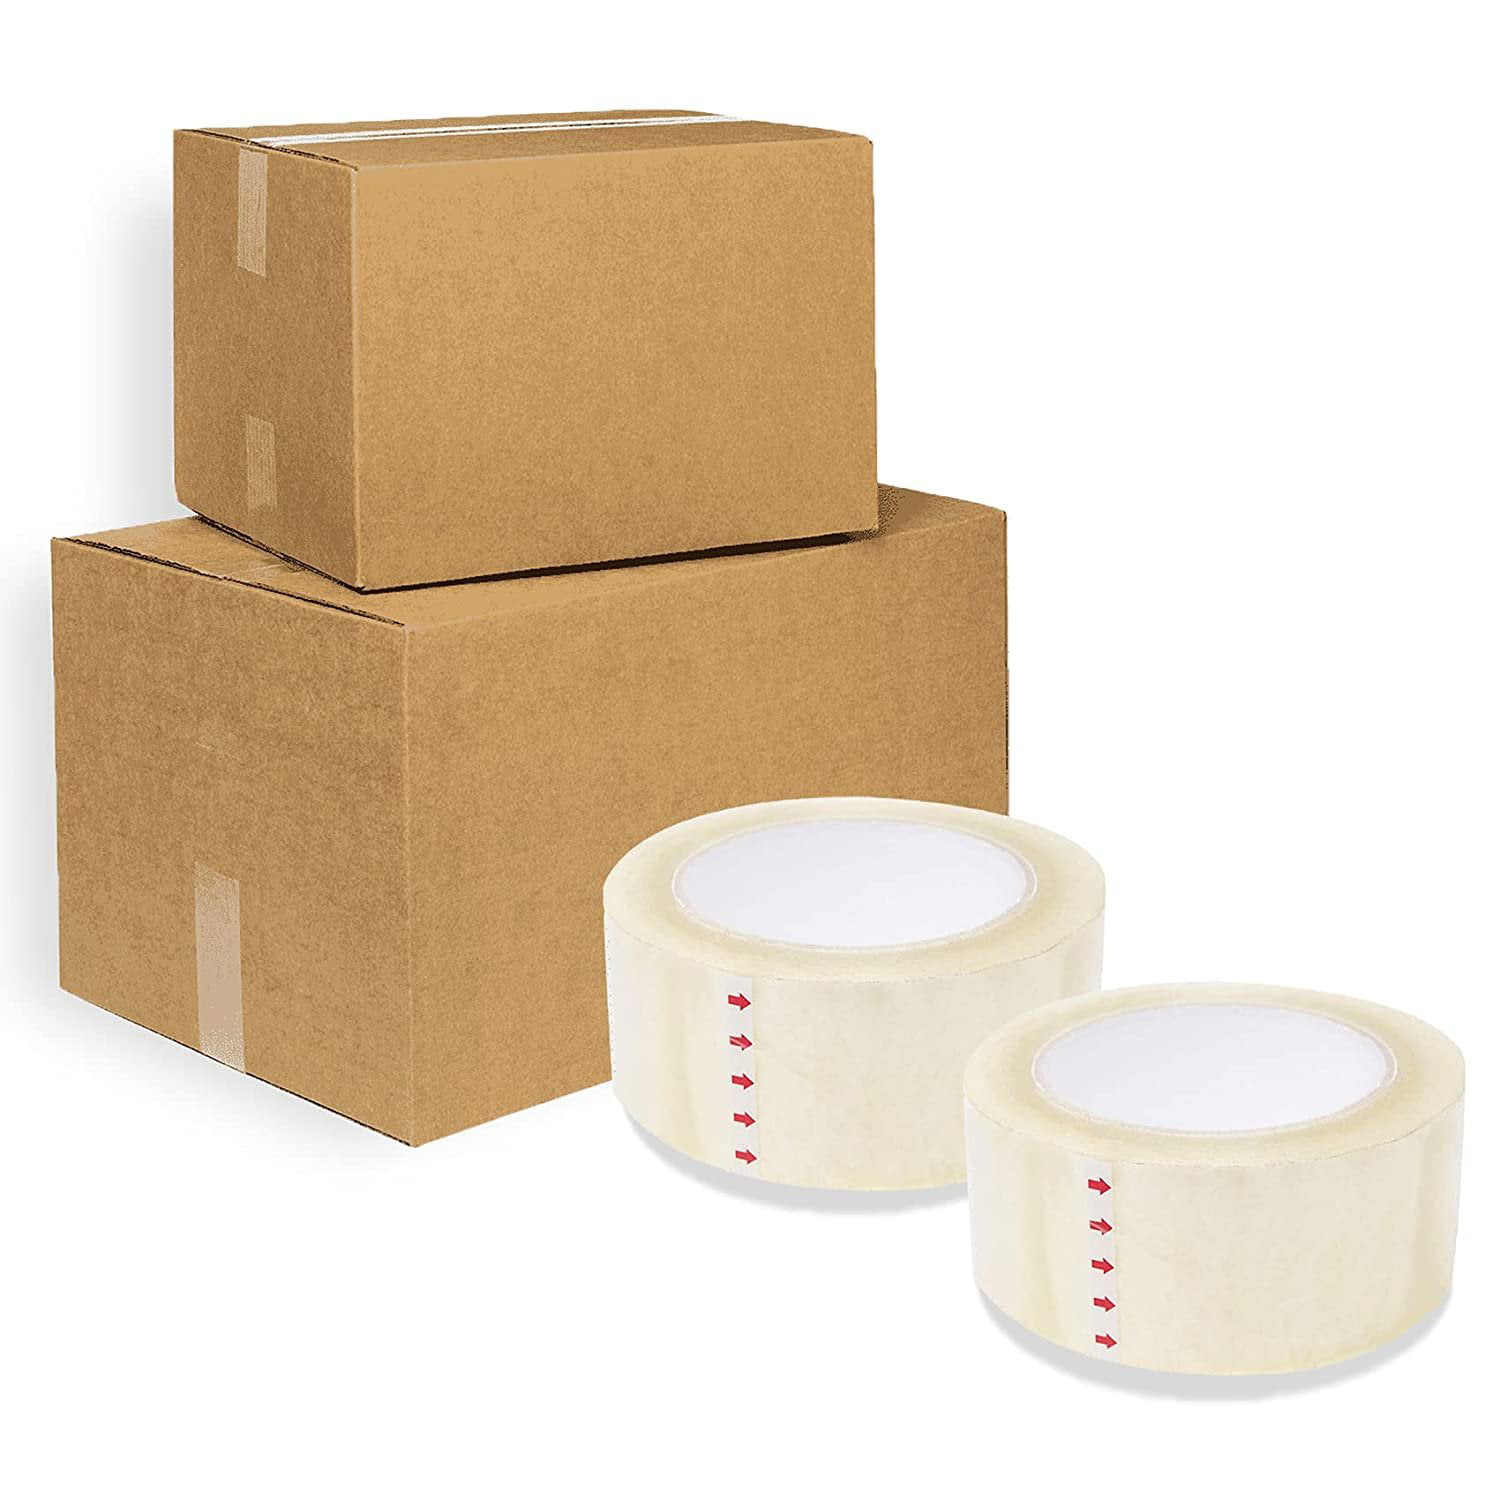 6 Rolls 3" x 55 yd Clear Carton Sealing Packing Tape Box Shipping 2Mil 